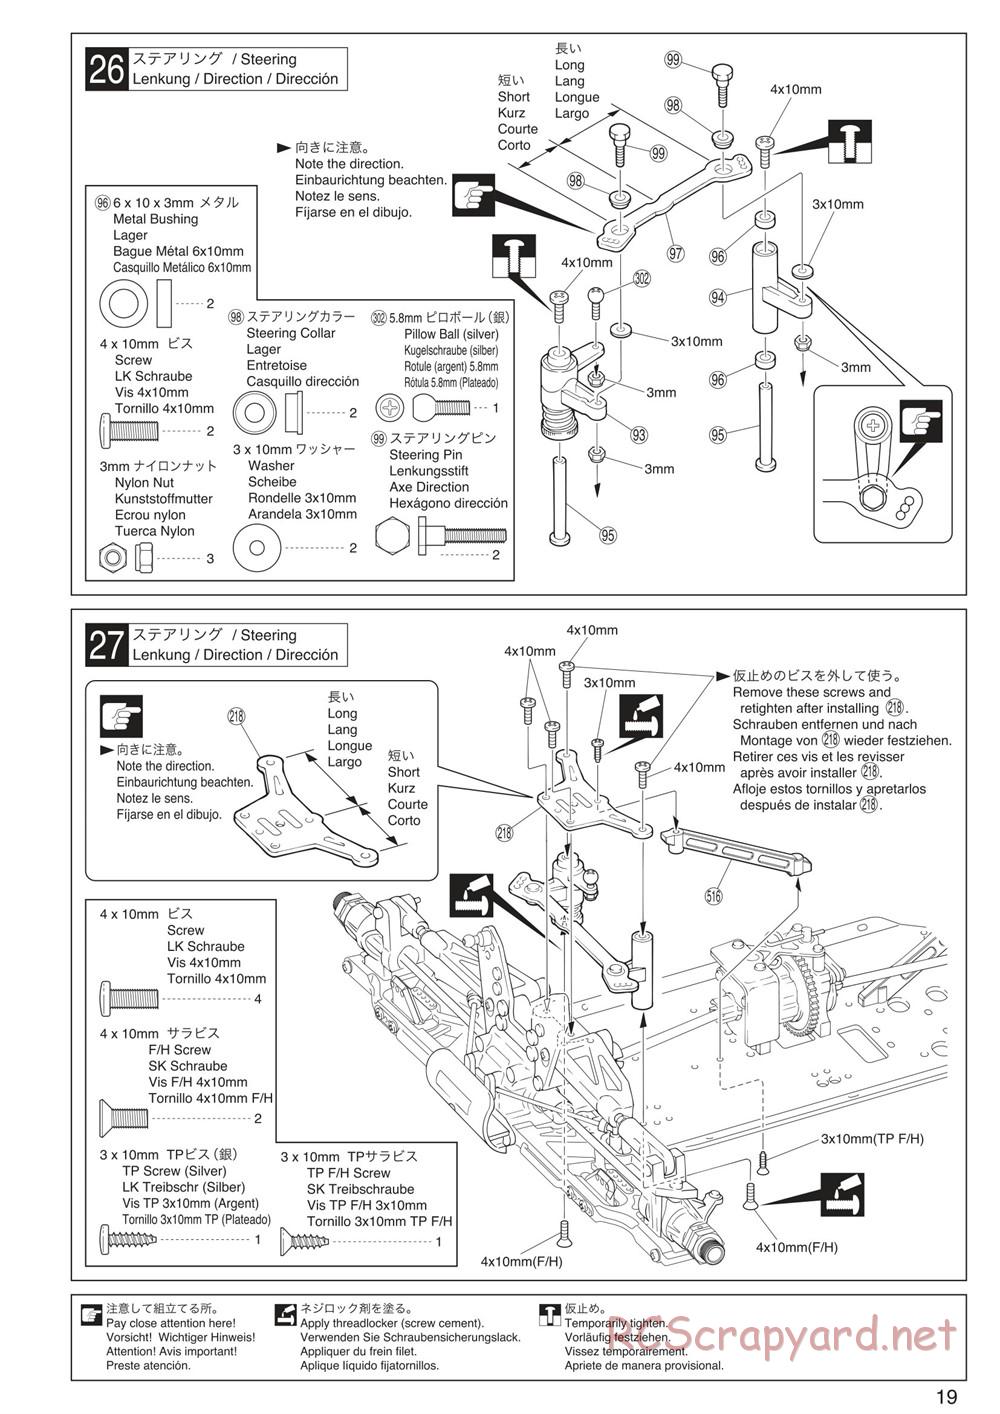 Kyosho - Inferno Neo ST 3.0 - Manual - Page 19